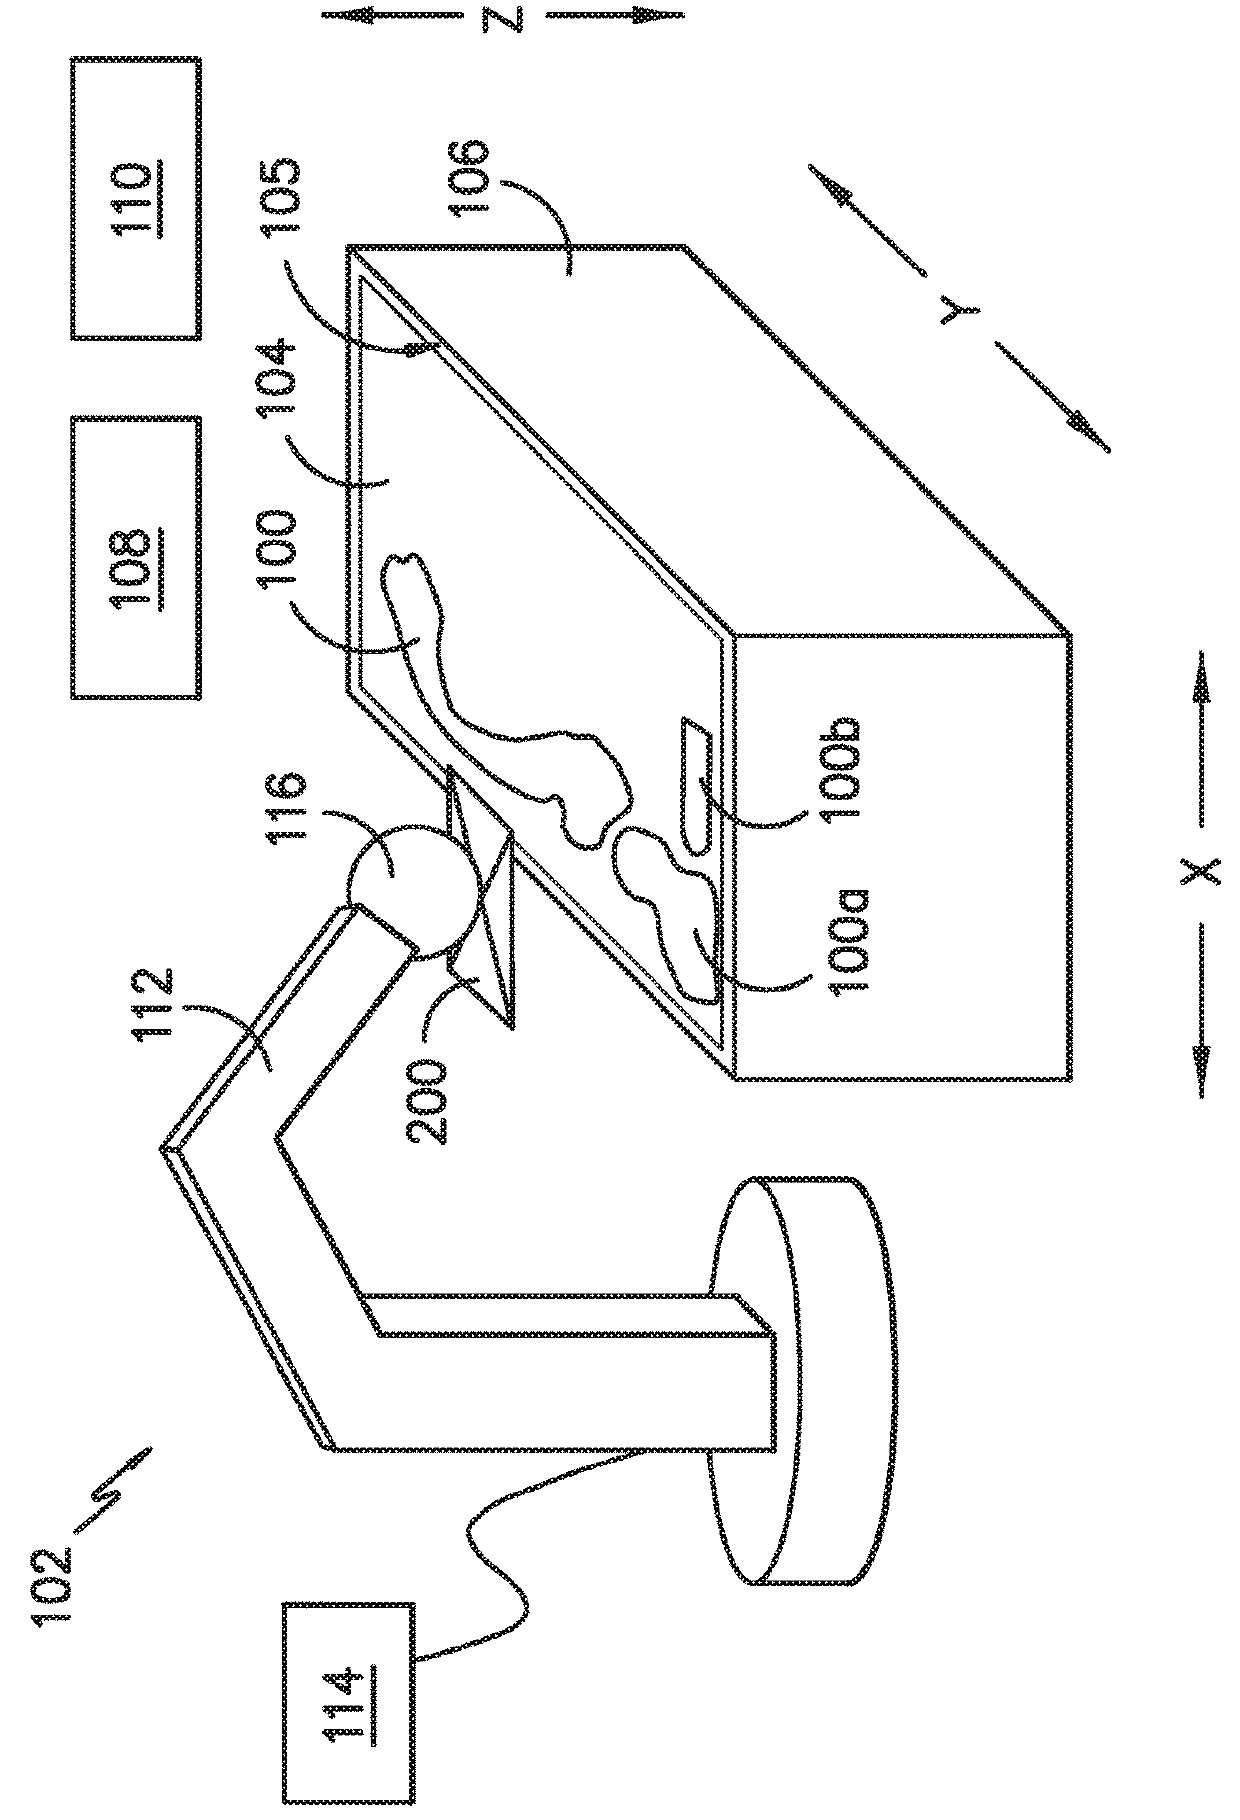 Adaptive apparatus and system for automated handling of components